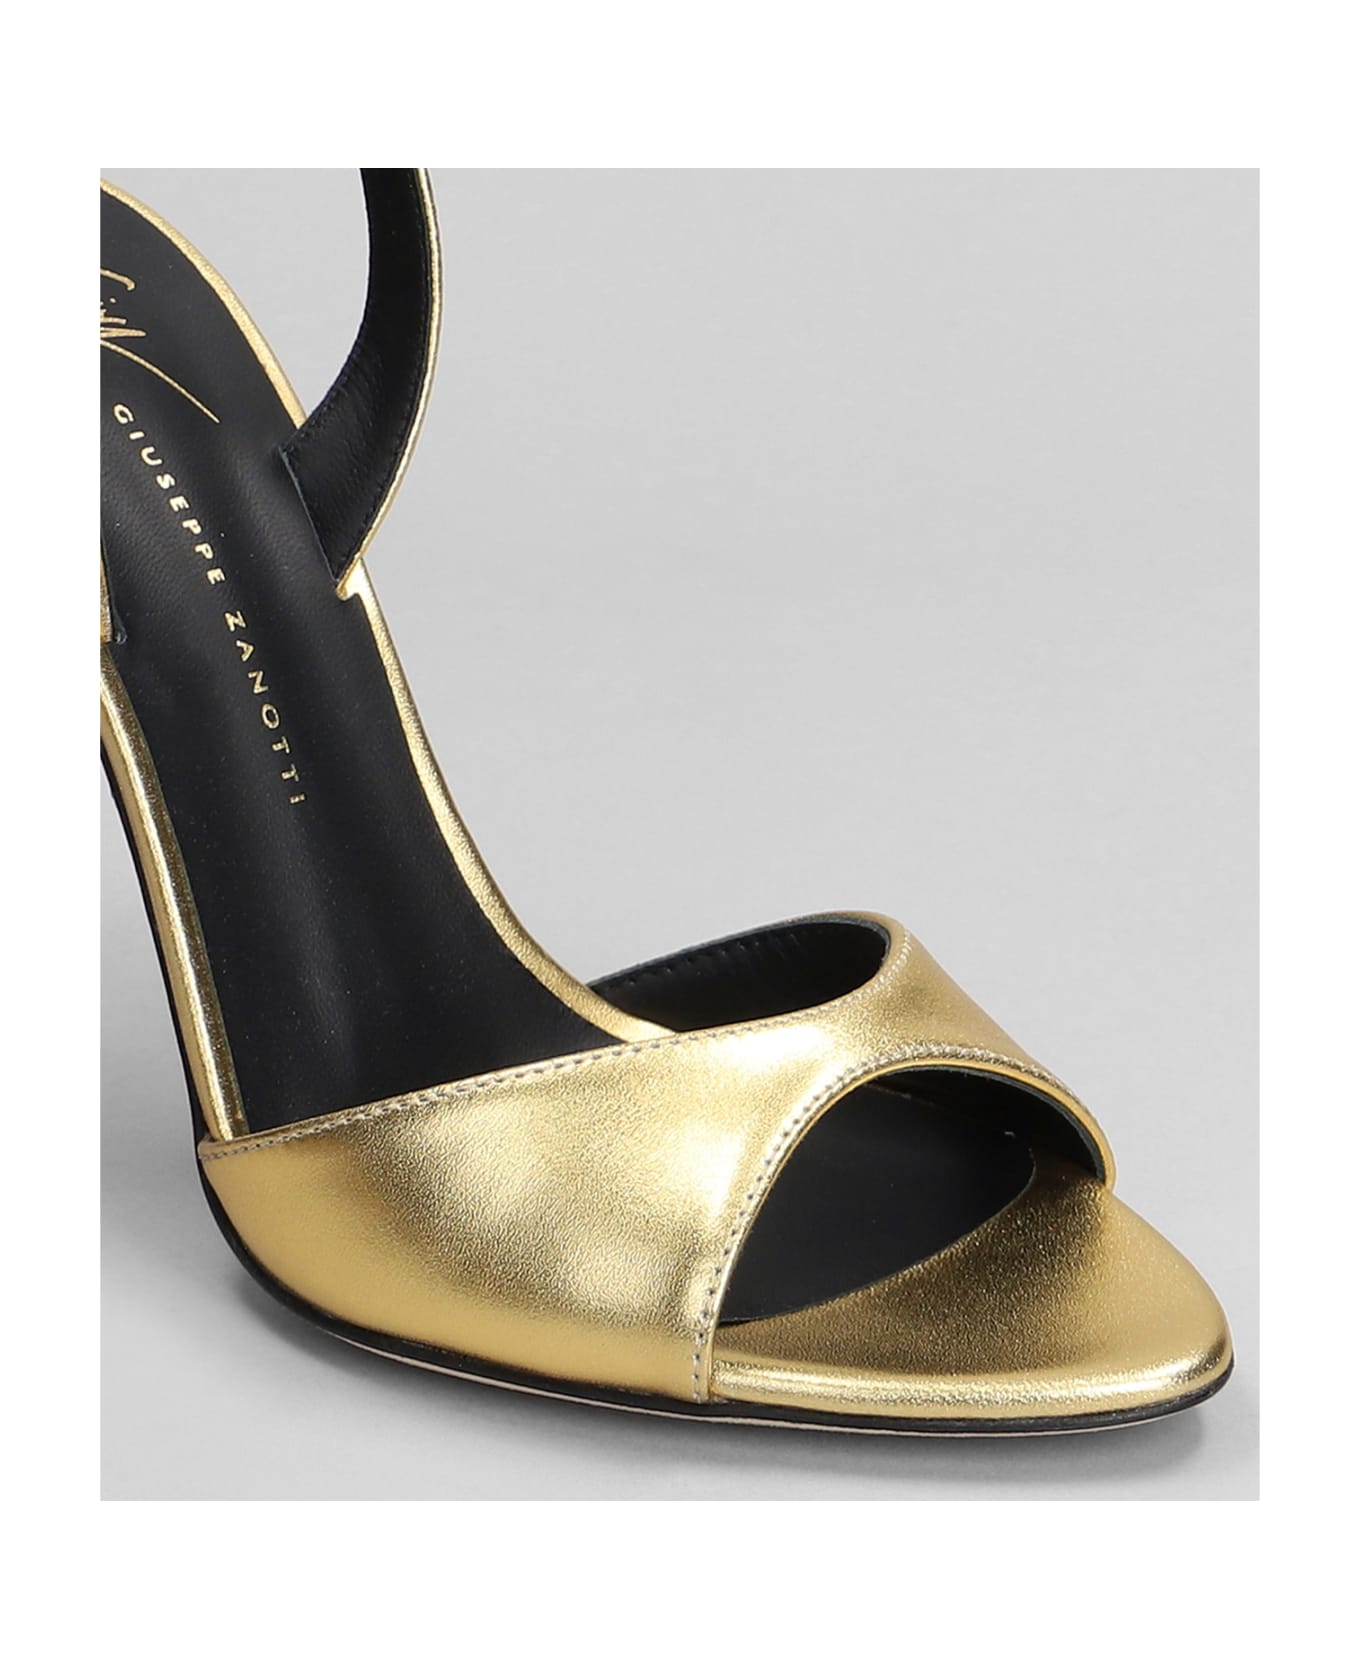 Giuseppe Zanotti Sandals In Gold Leather - gold